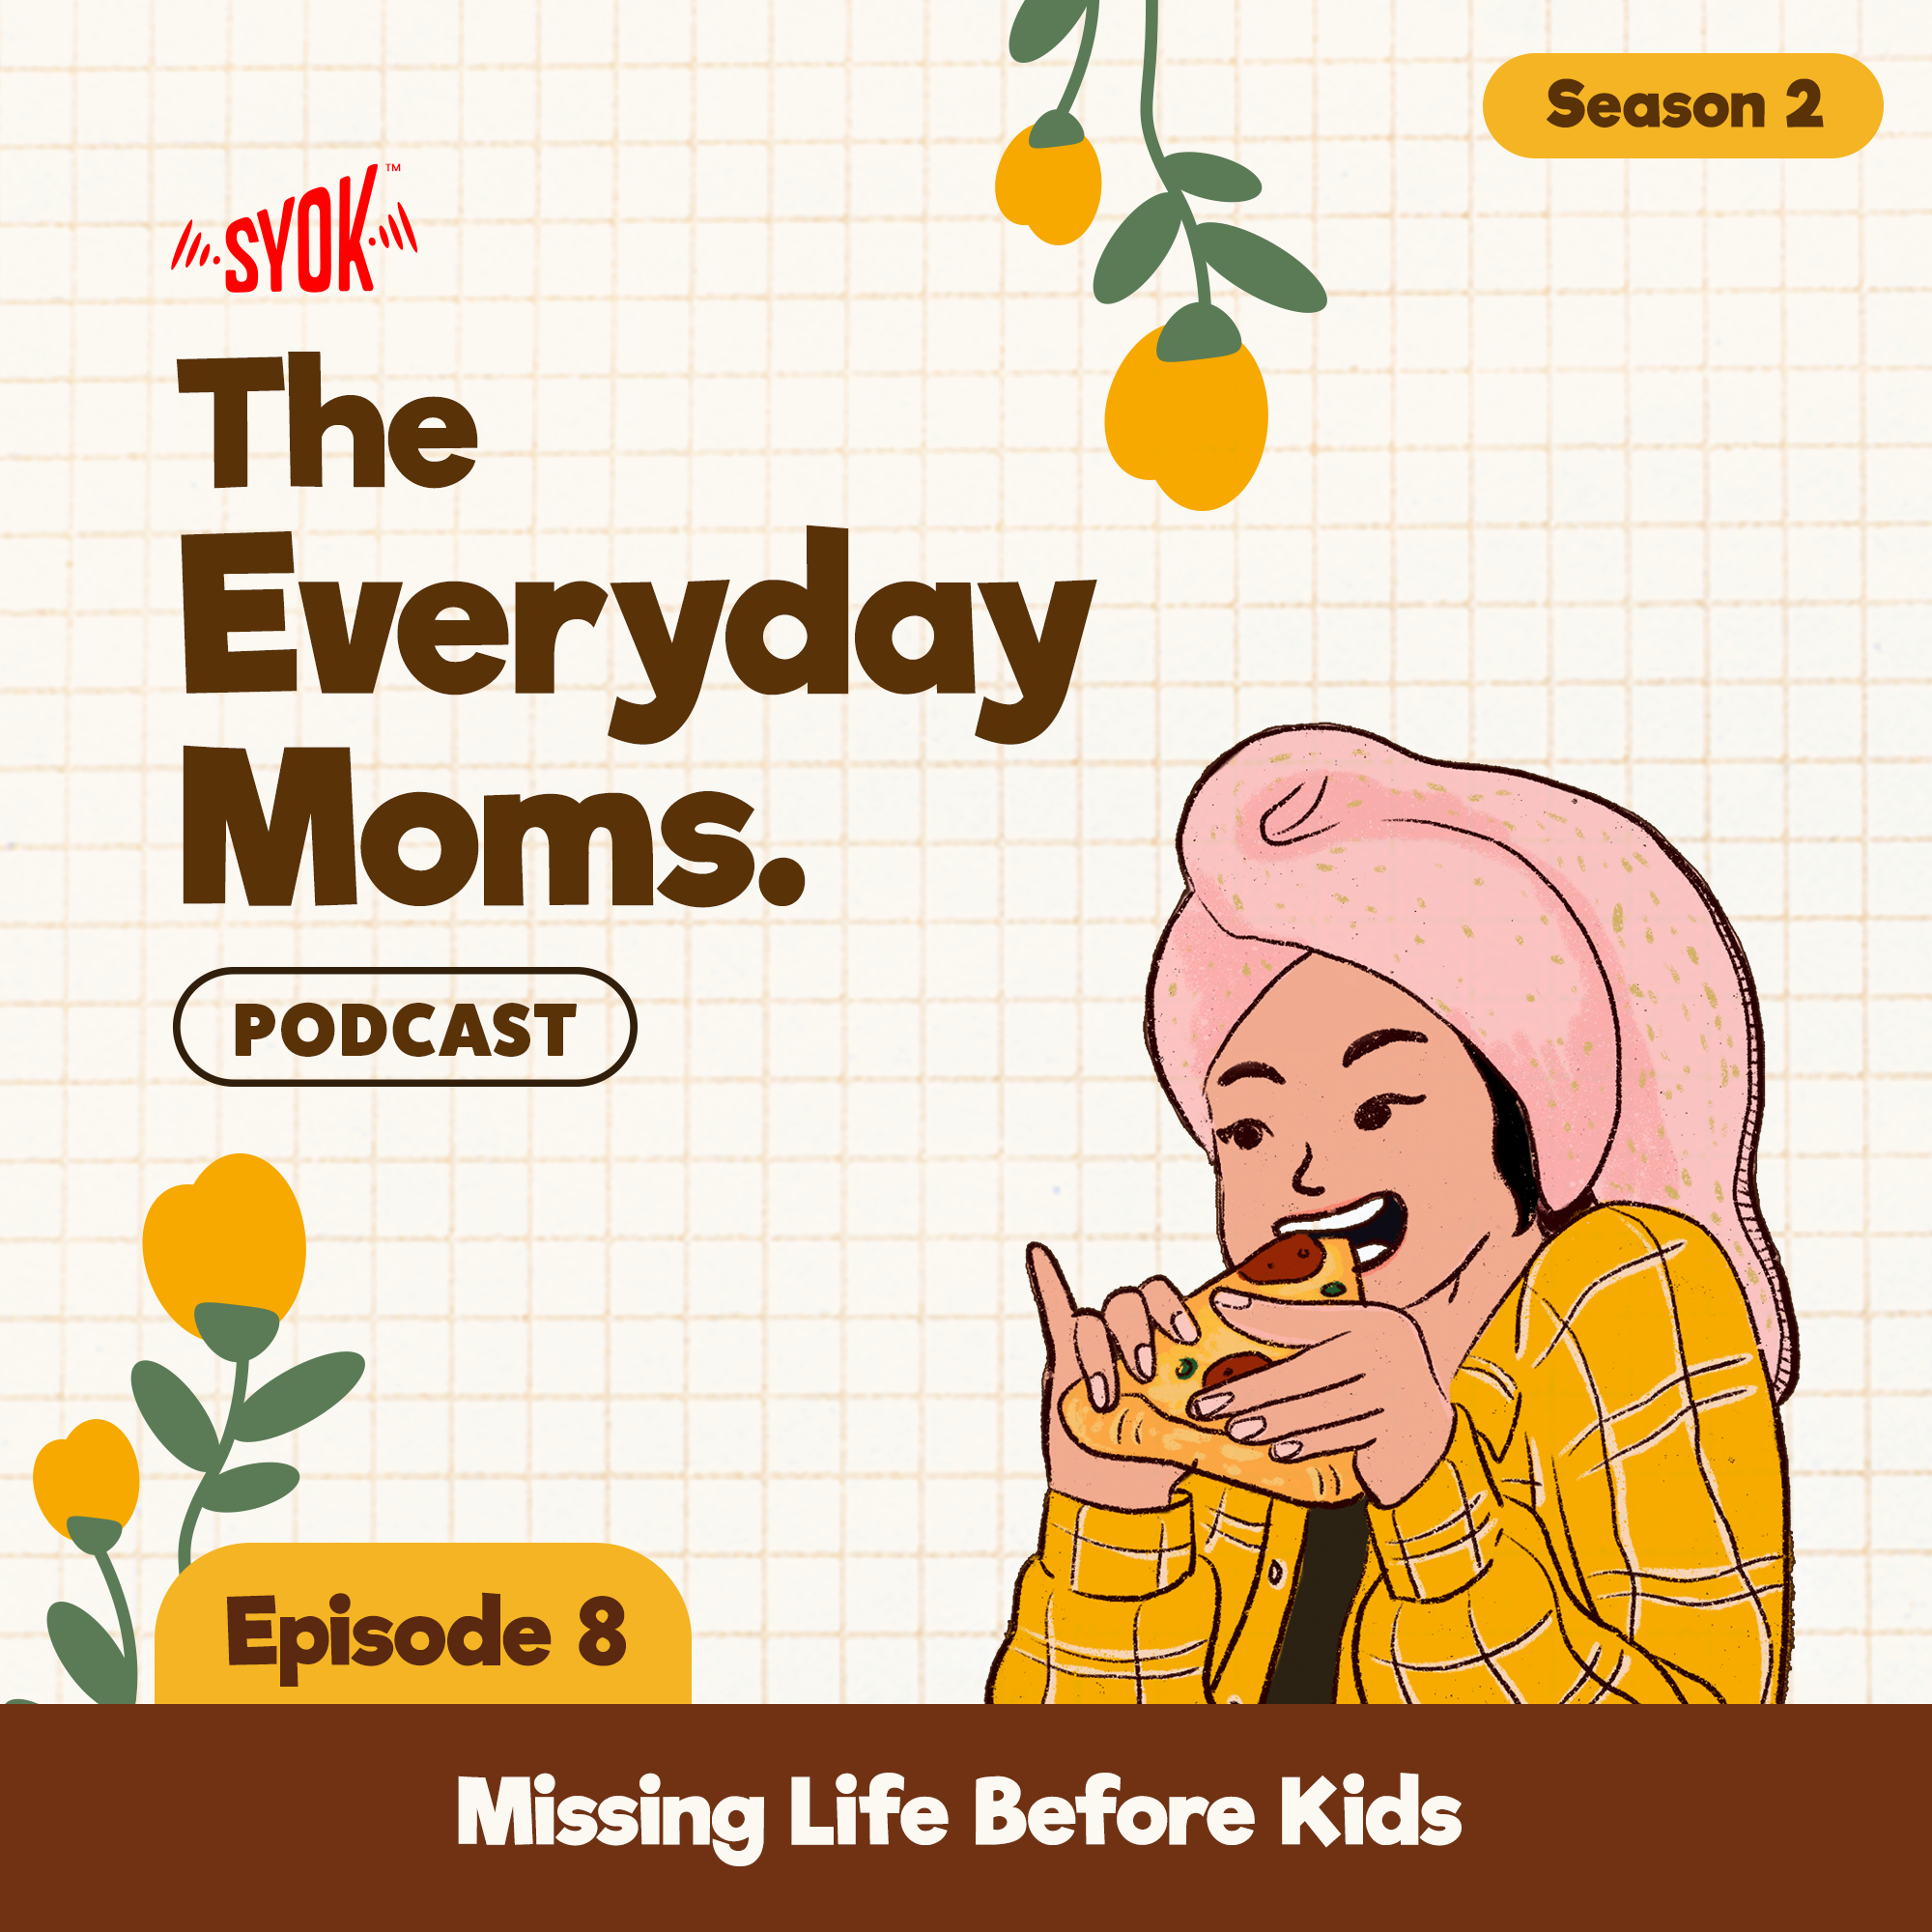 Missing Life Before Kids | The Everyday Moms S2E8